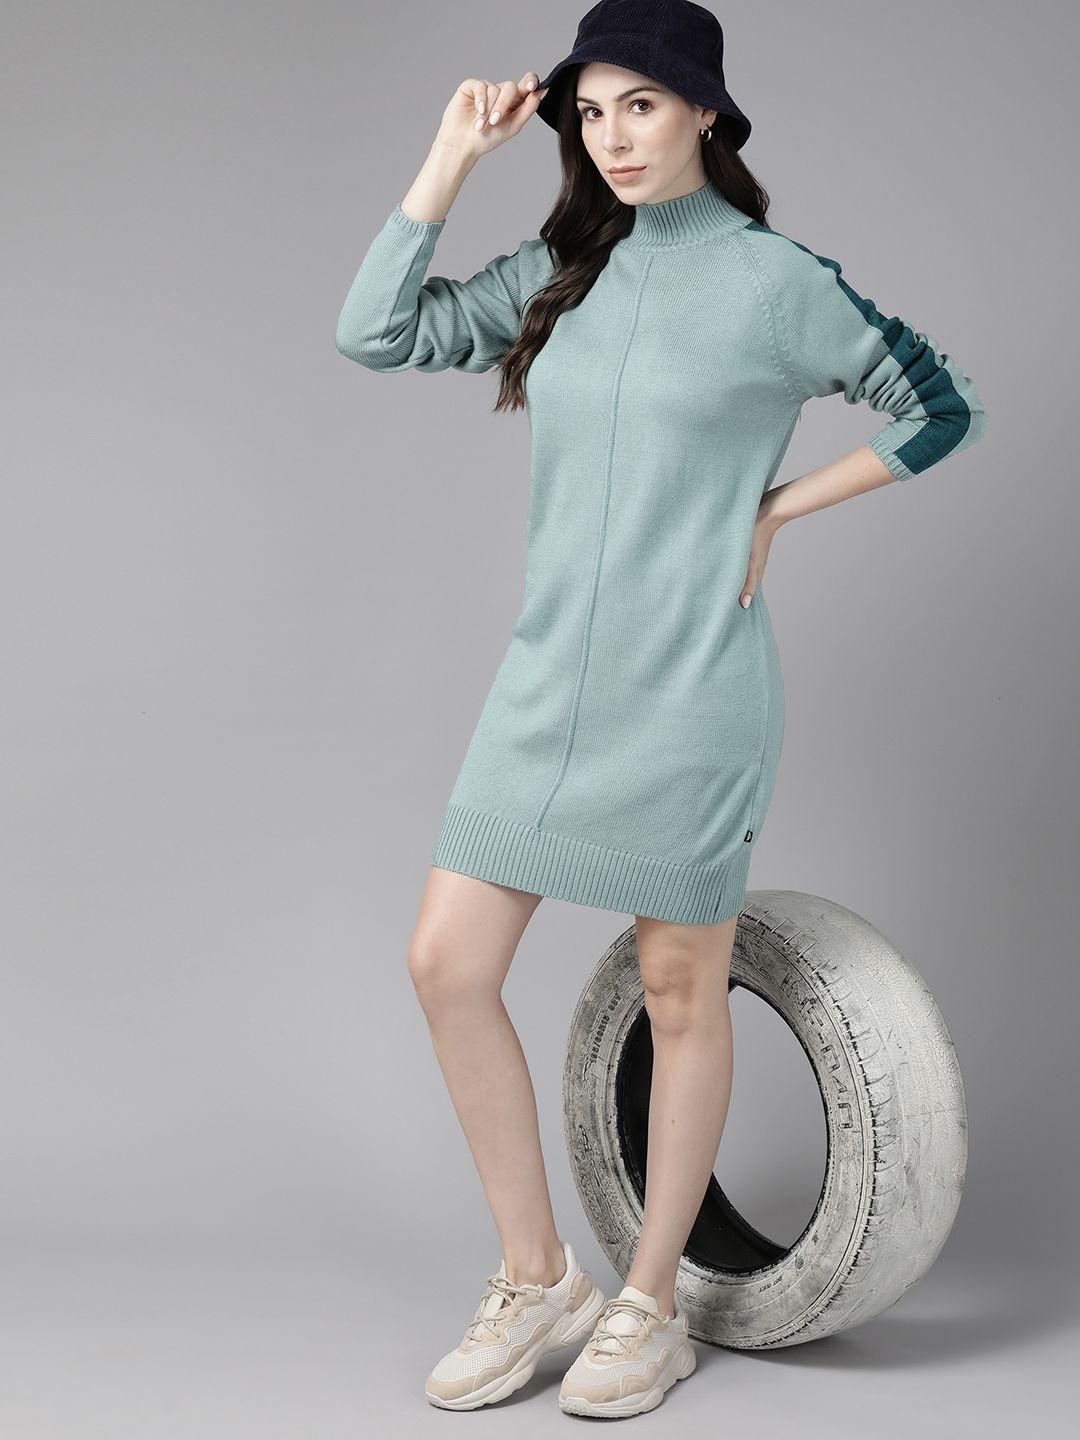 the roadster lifestyle co. solid acrylic jumper dress